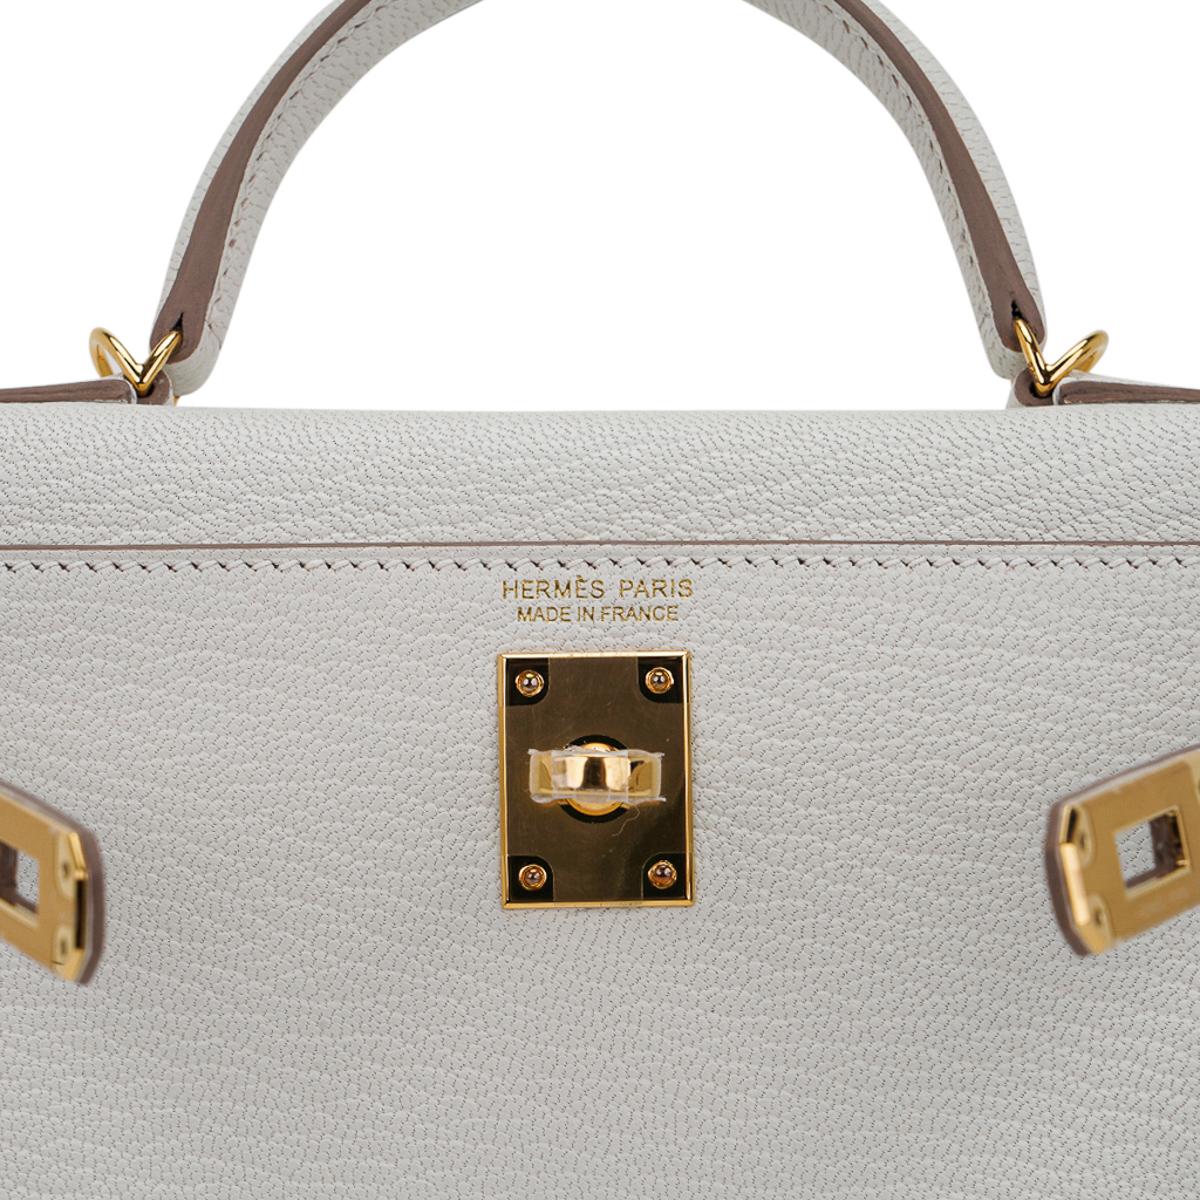 Hermes Kelly 20 Mini Sellier Mushroom Bag Chevre Leather Gold Hardware In New Condition For Sale In Miami, FL